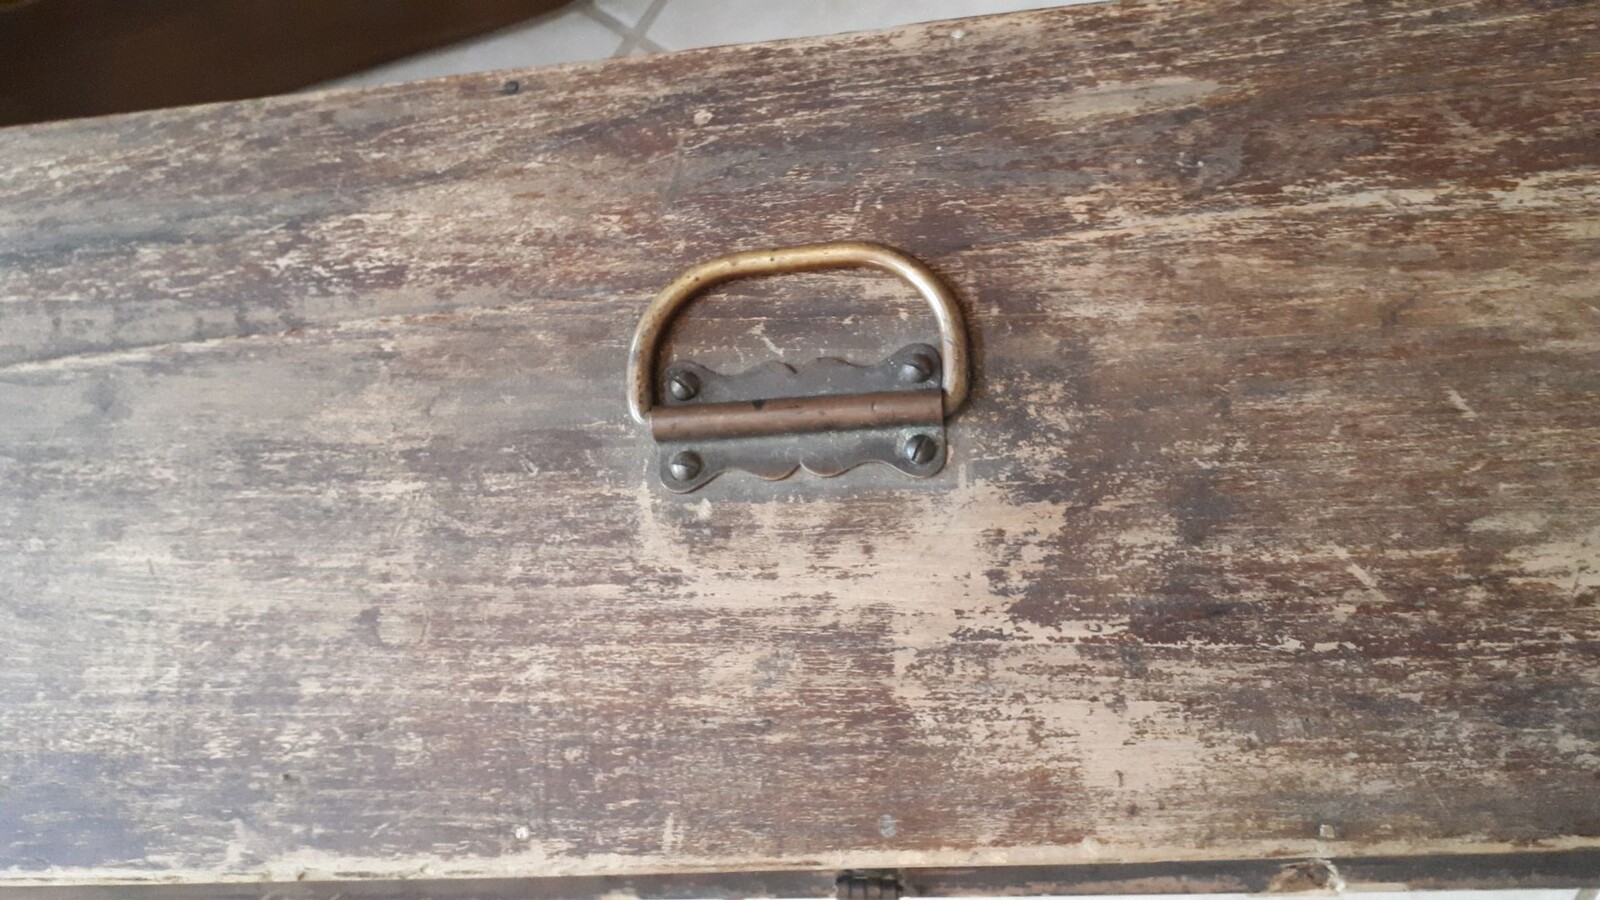 Top handle of the box